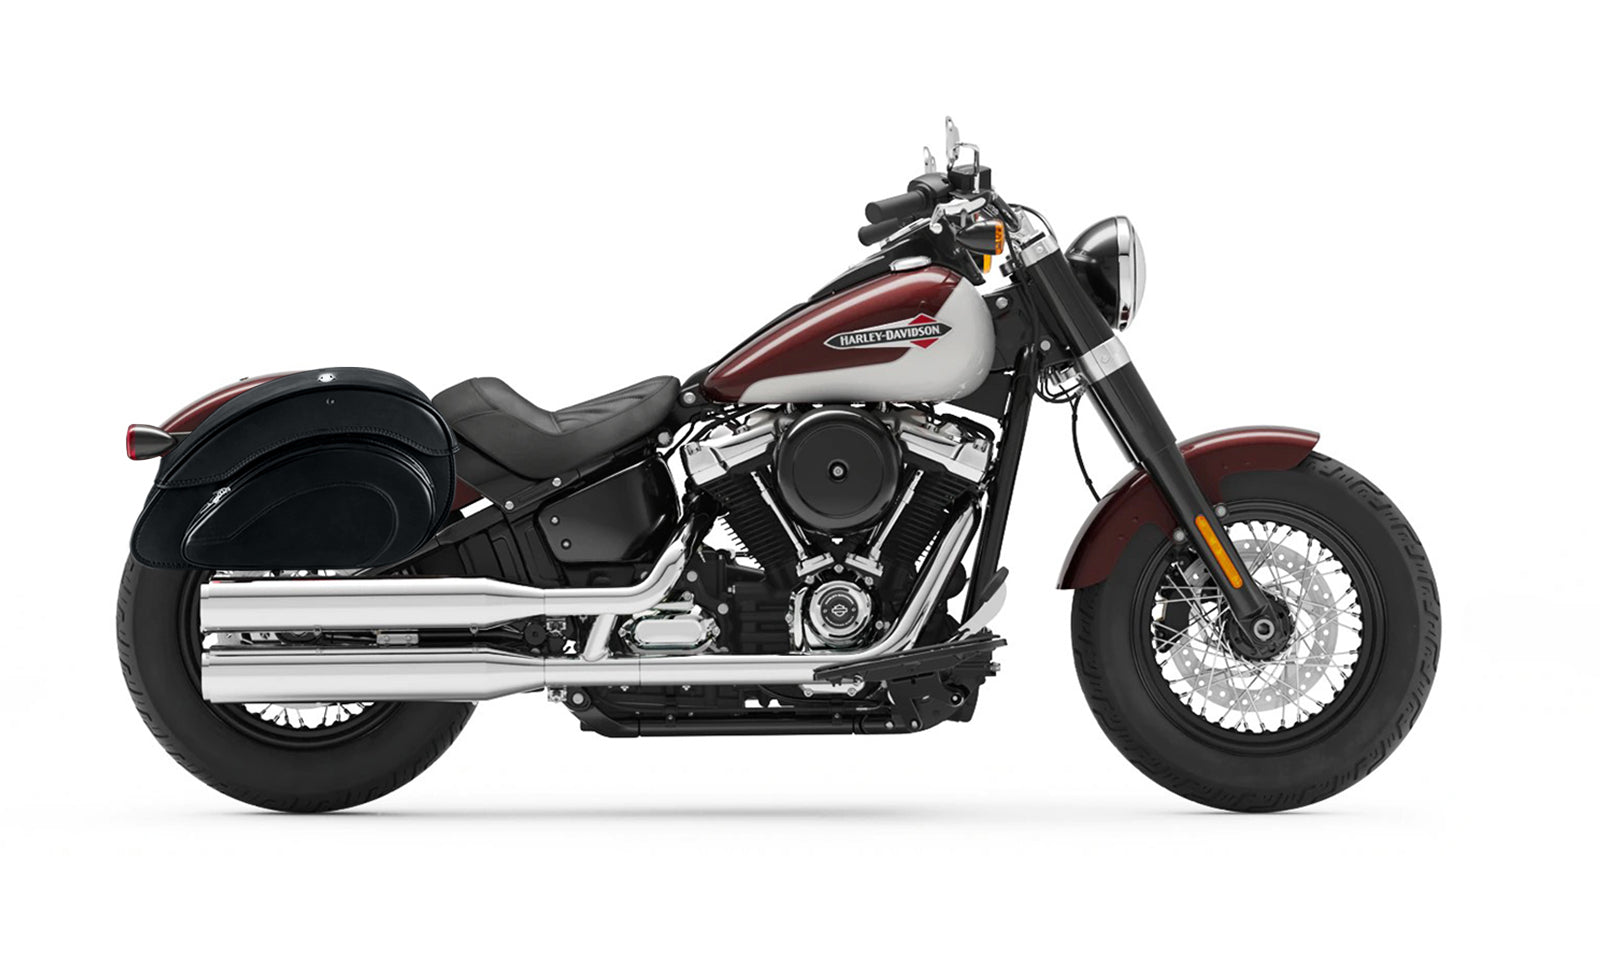 28L - Overlord Large Leather Saddlebags for Harley Softail Slim FLSL on Bike Photo @expand